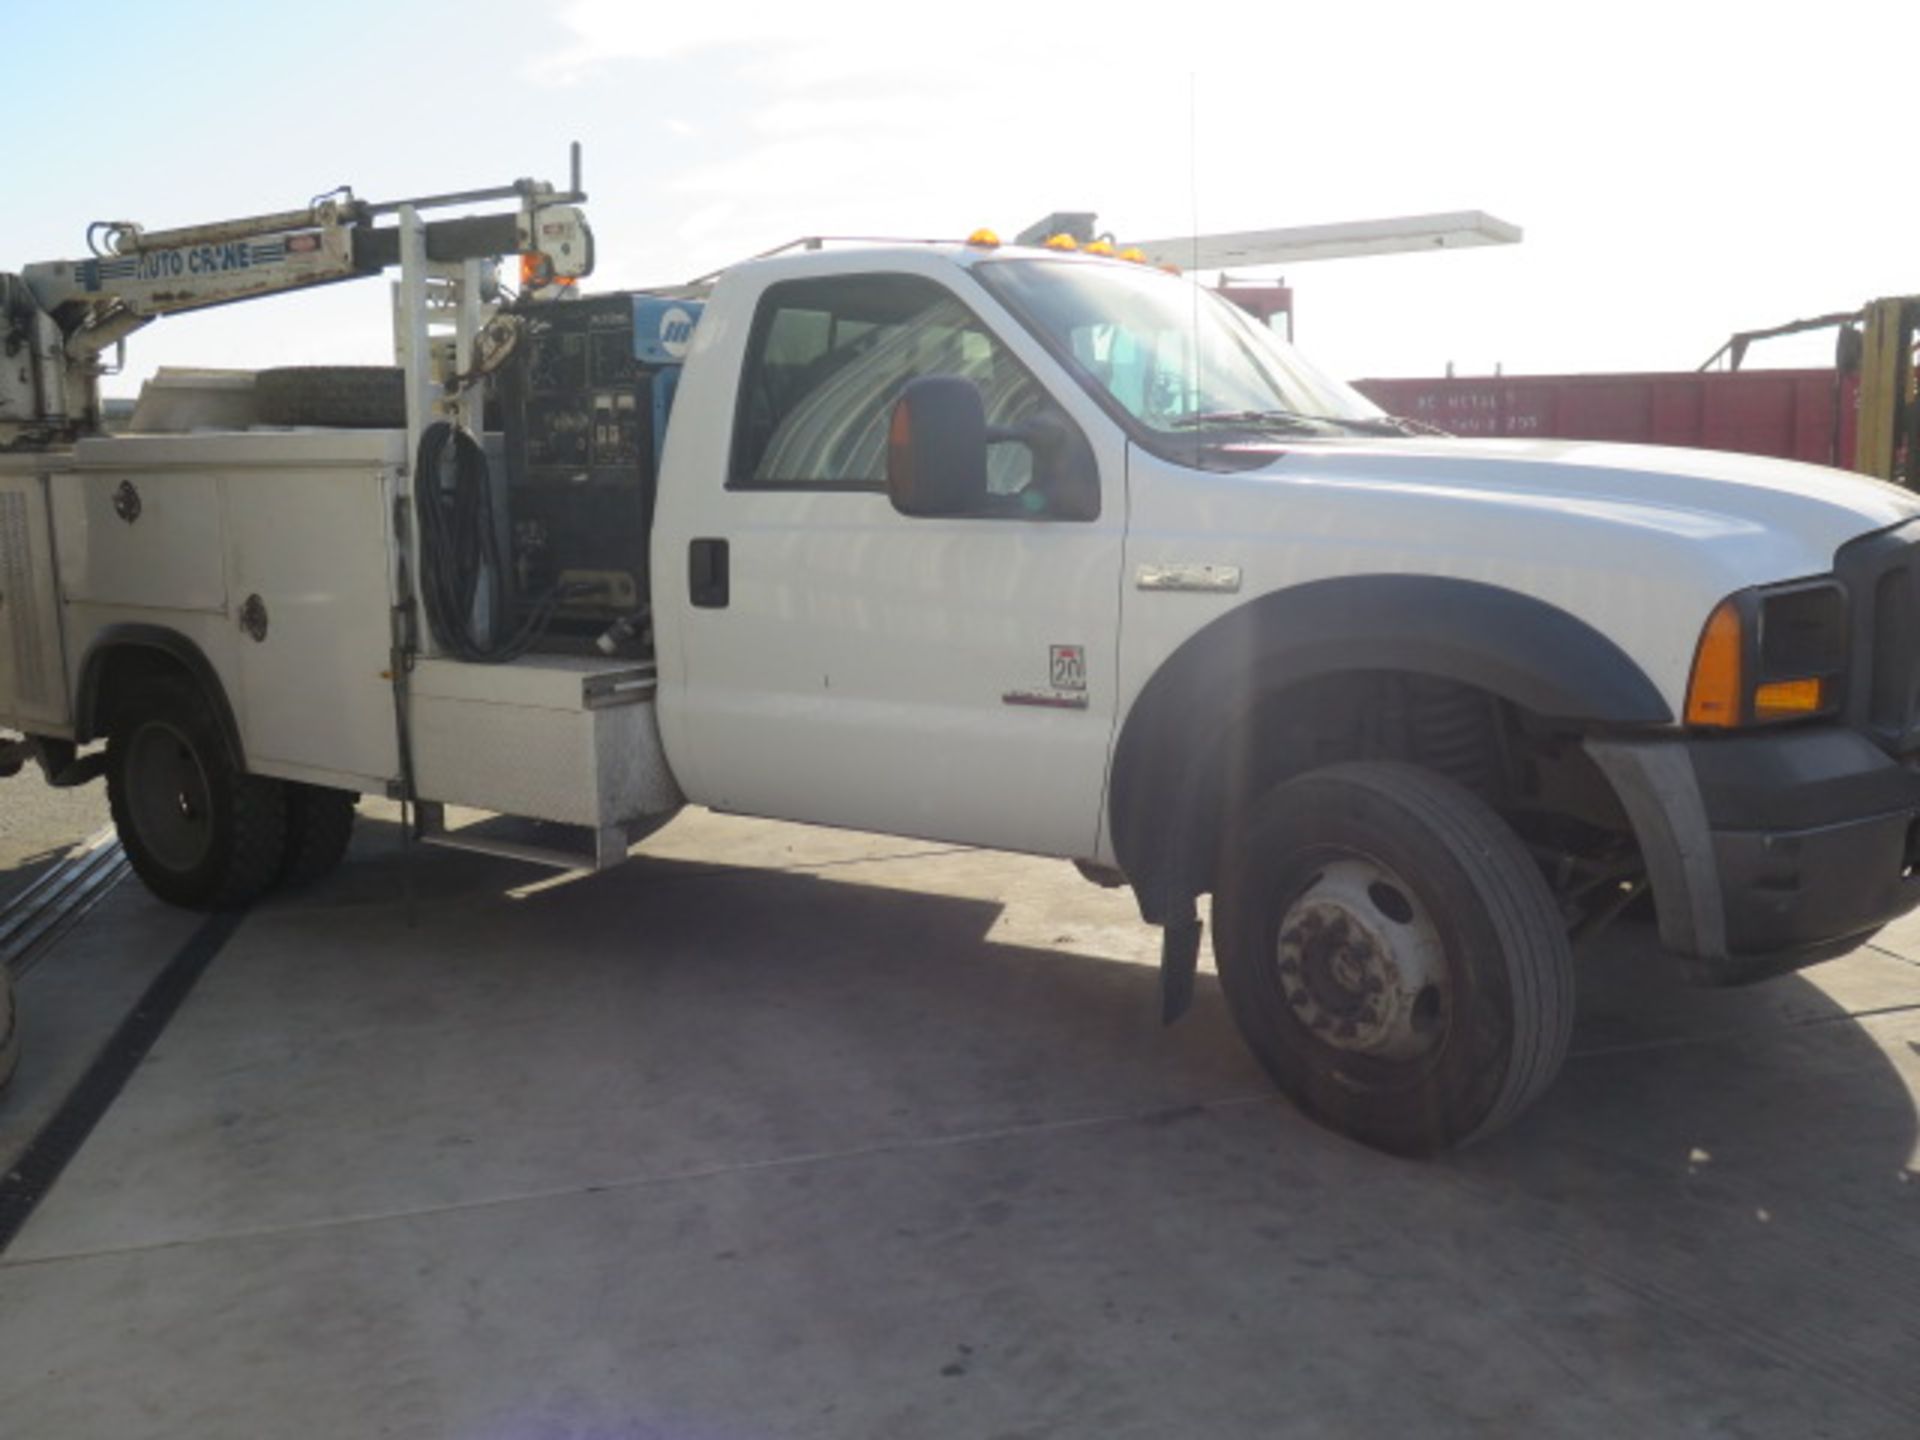 2012 Ford F-550 XL Super Duty 4X4 Service Welding Truck Lisc# 7W89113 w/ Turbo Diesel, SOLD AS IS - Image 4 of 42